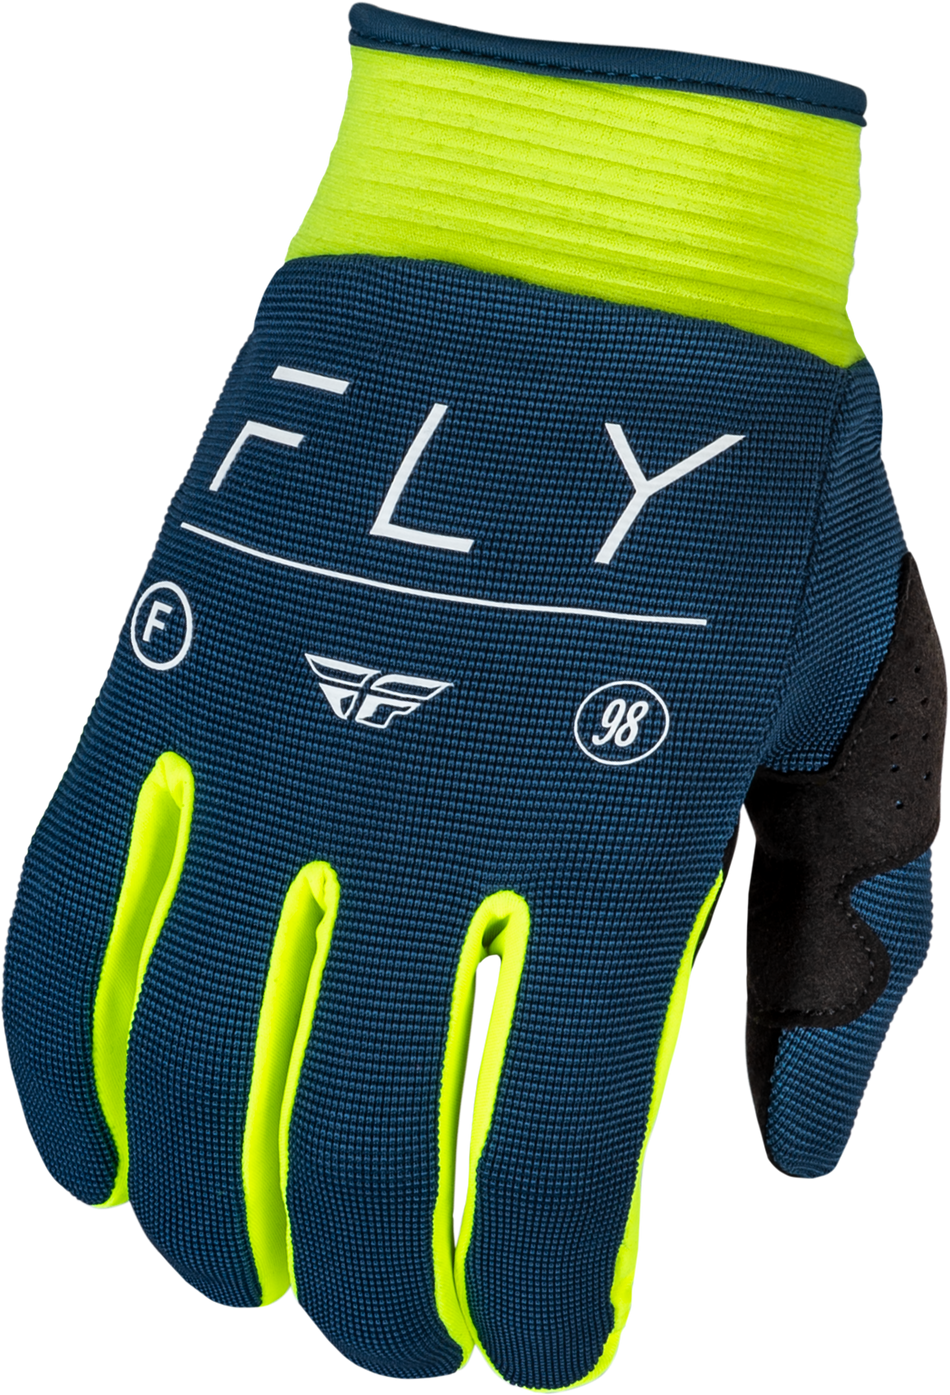 FLY RACING Youth F-16 Gloves Navy/Hi-Vis/White Ys 377-912YS